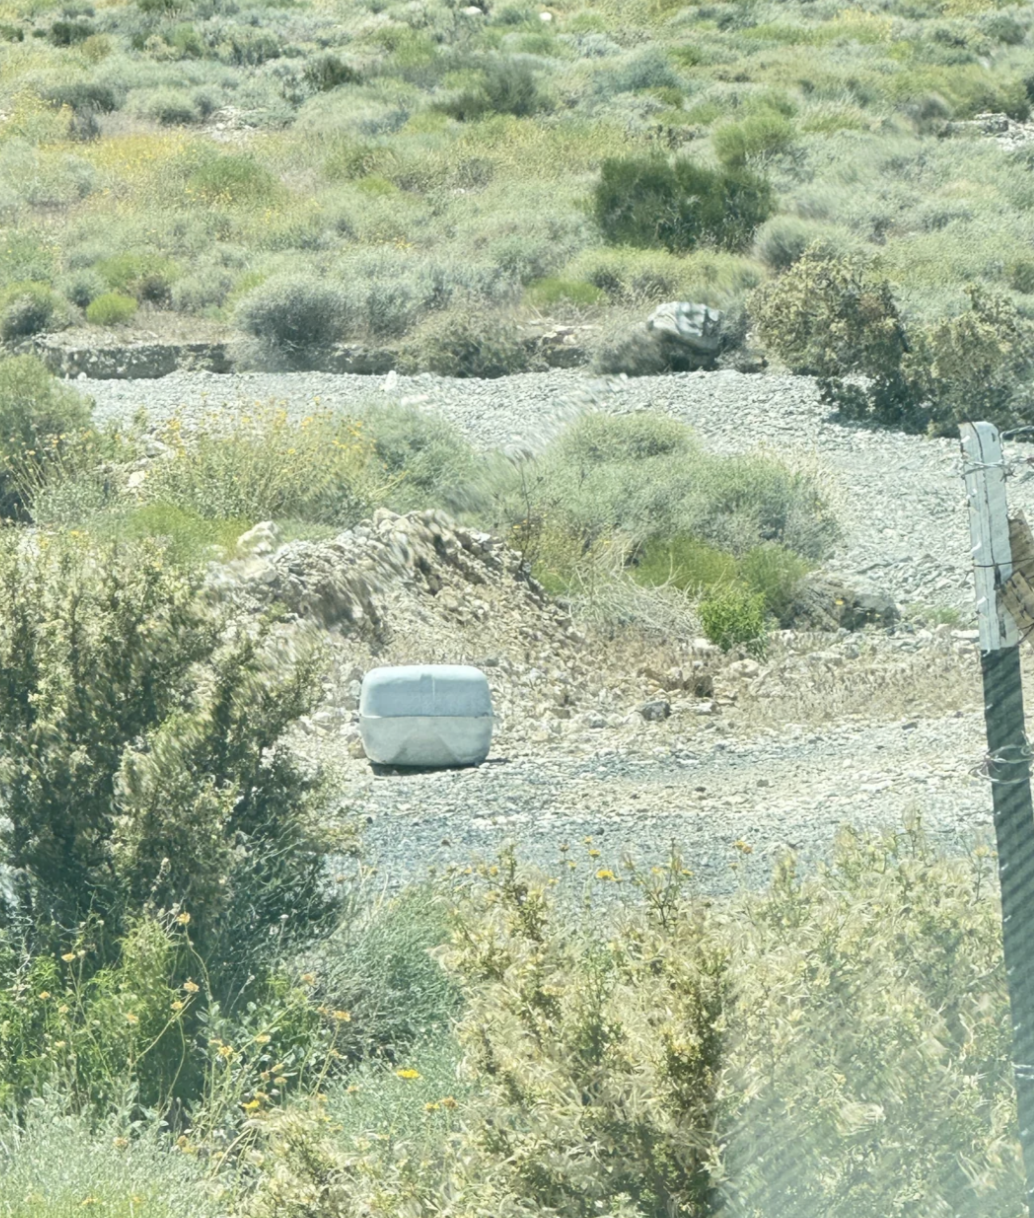 A large cube-shaped concrete block in a dry, rocky landscape with sparse vegetation and bushes in the background